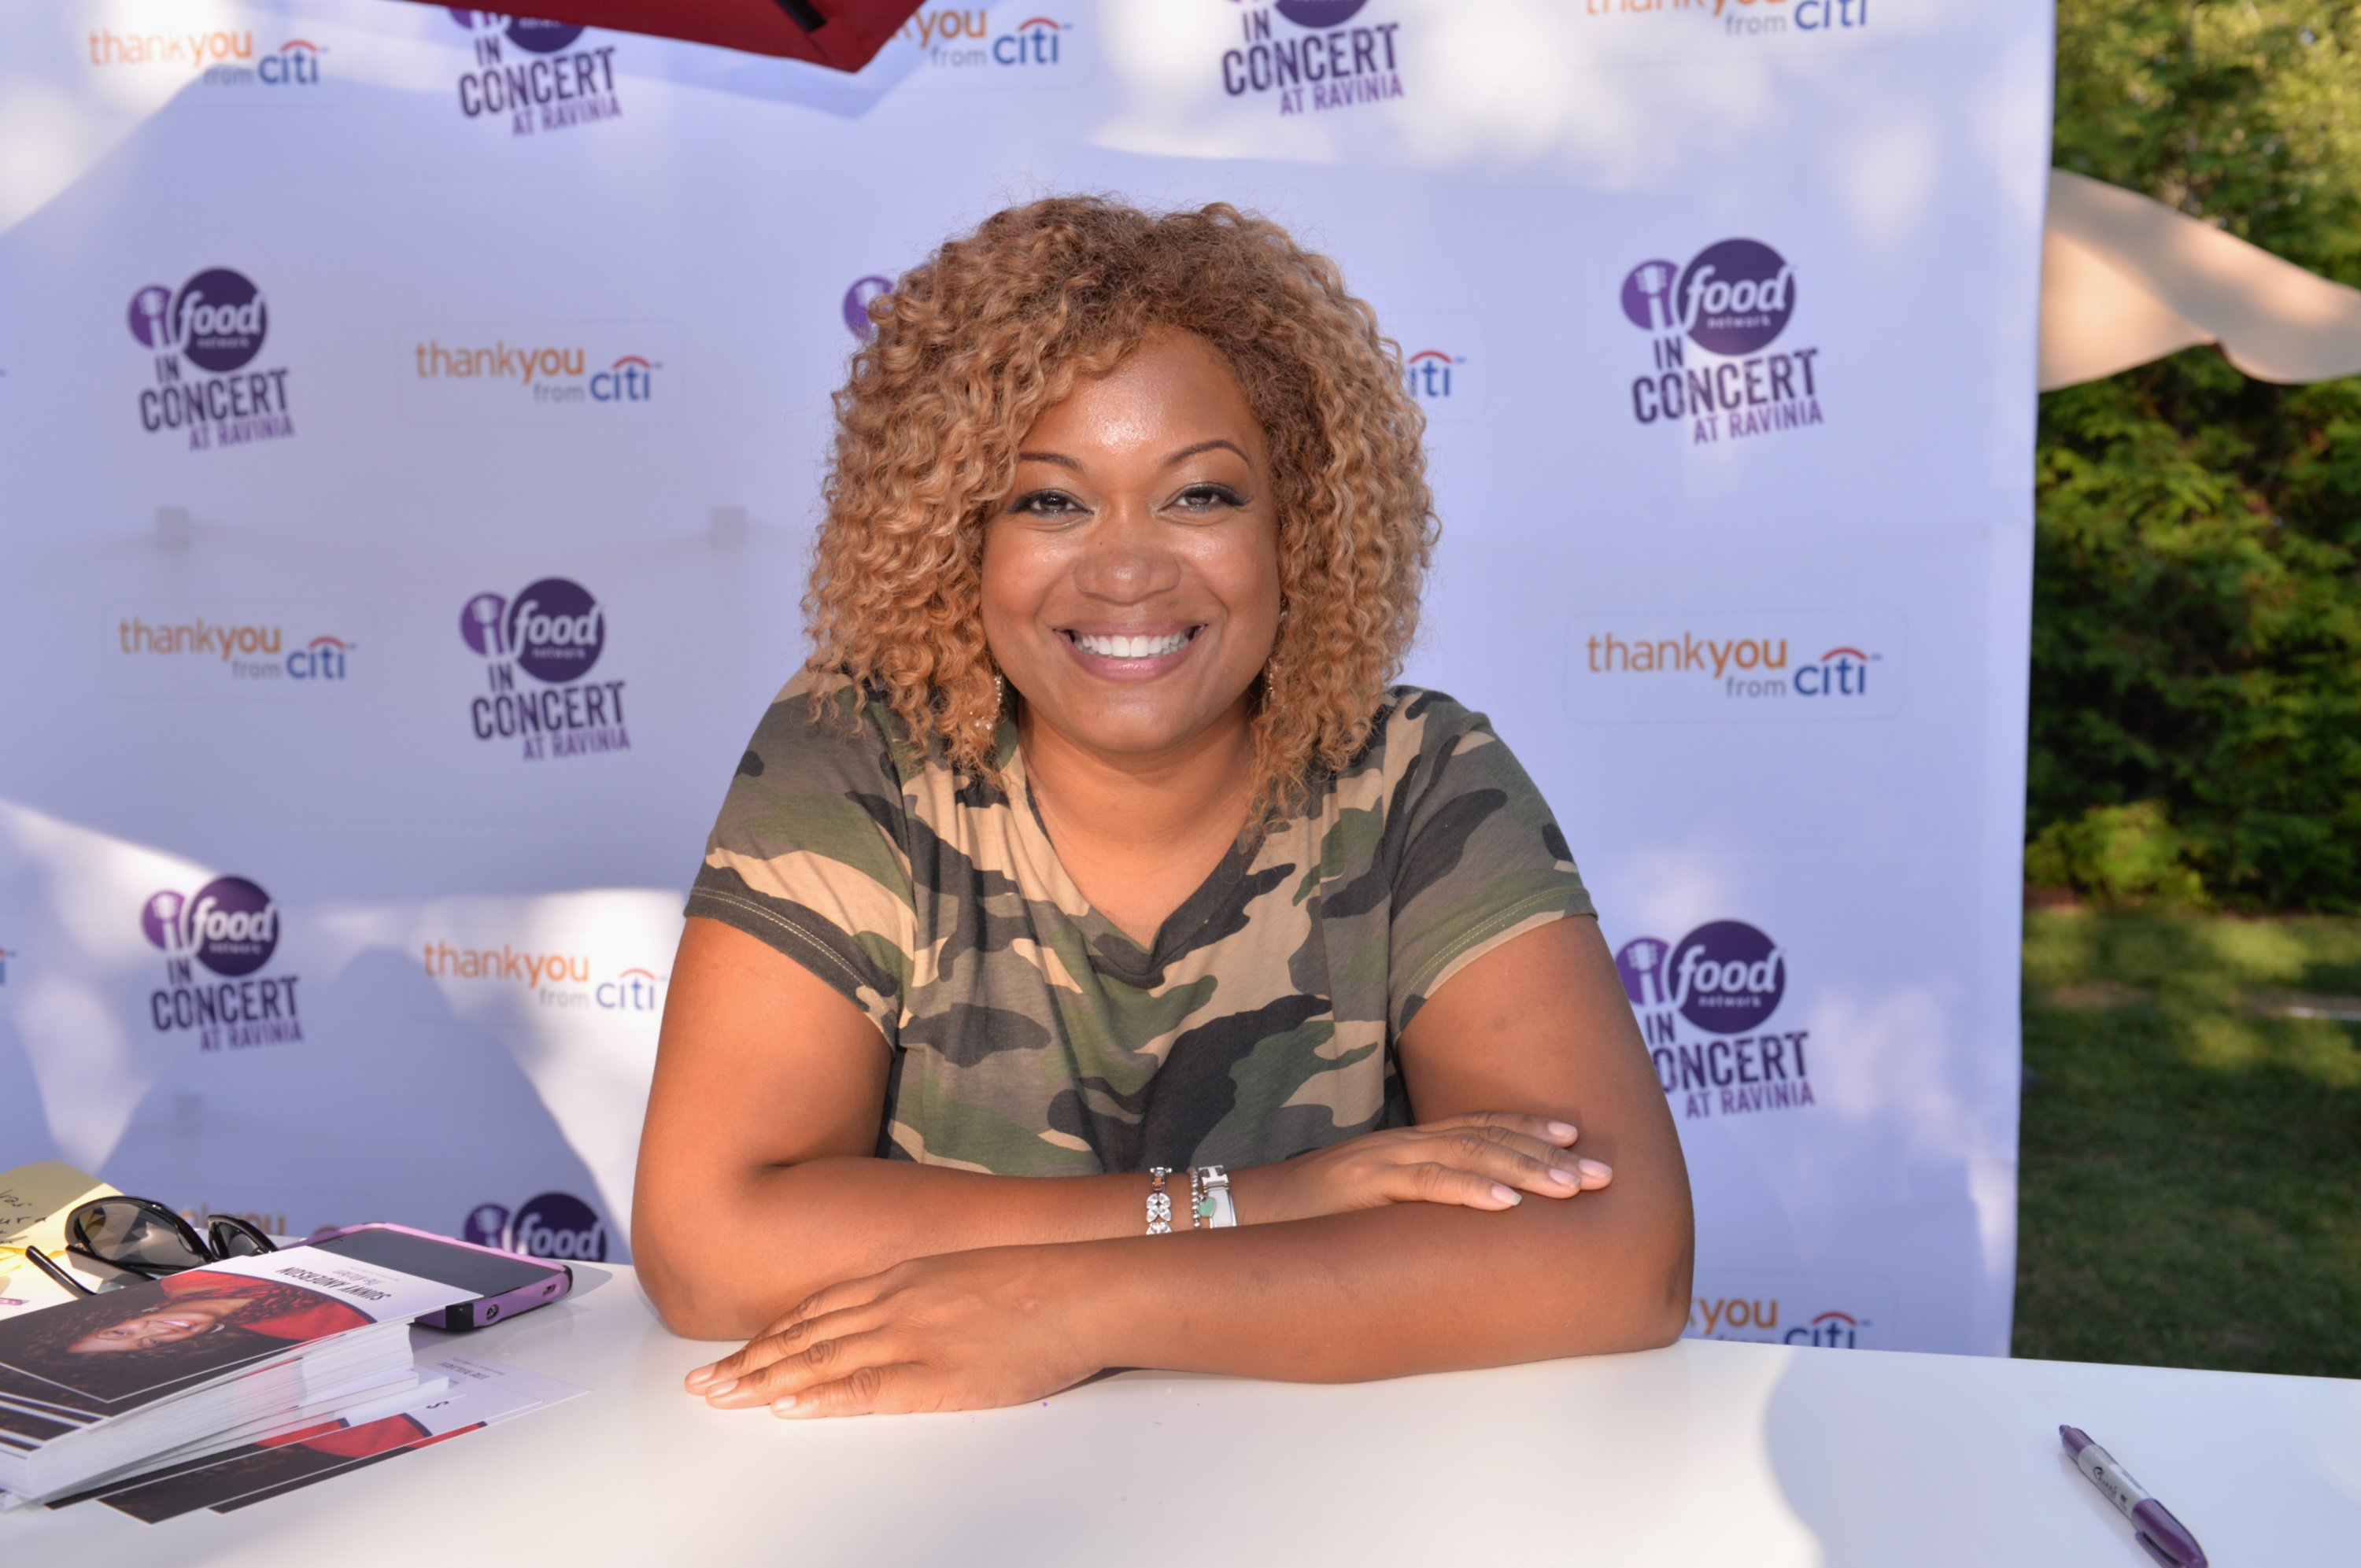 Food Network personality Sunny Anderson wears a camo print tee in this photograph.